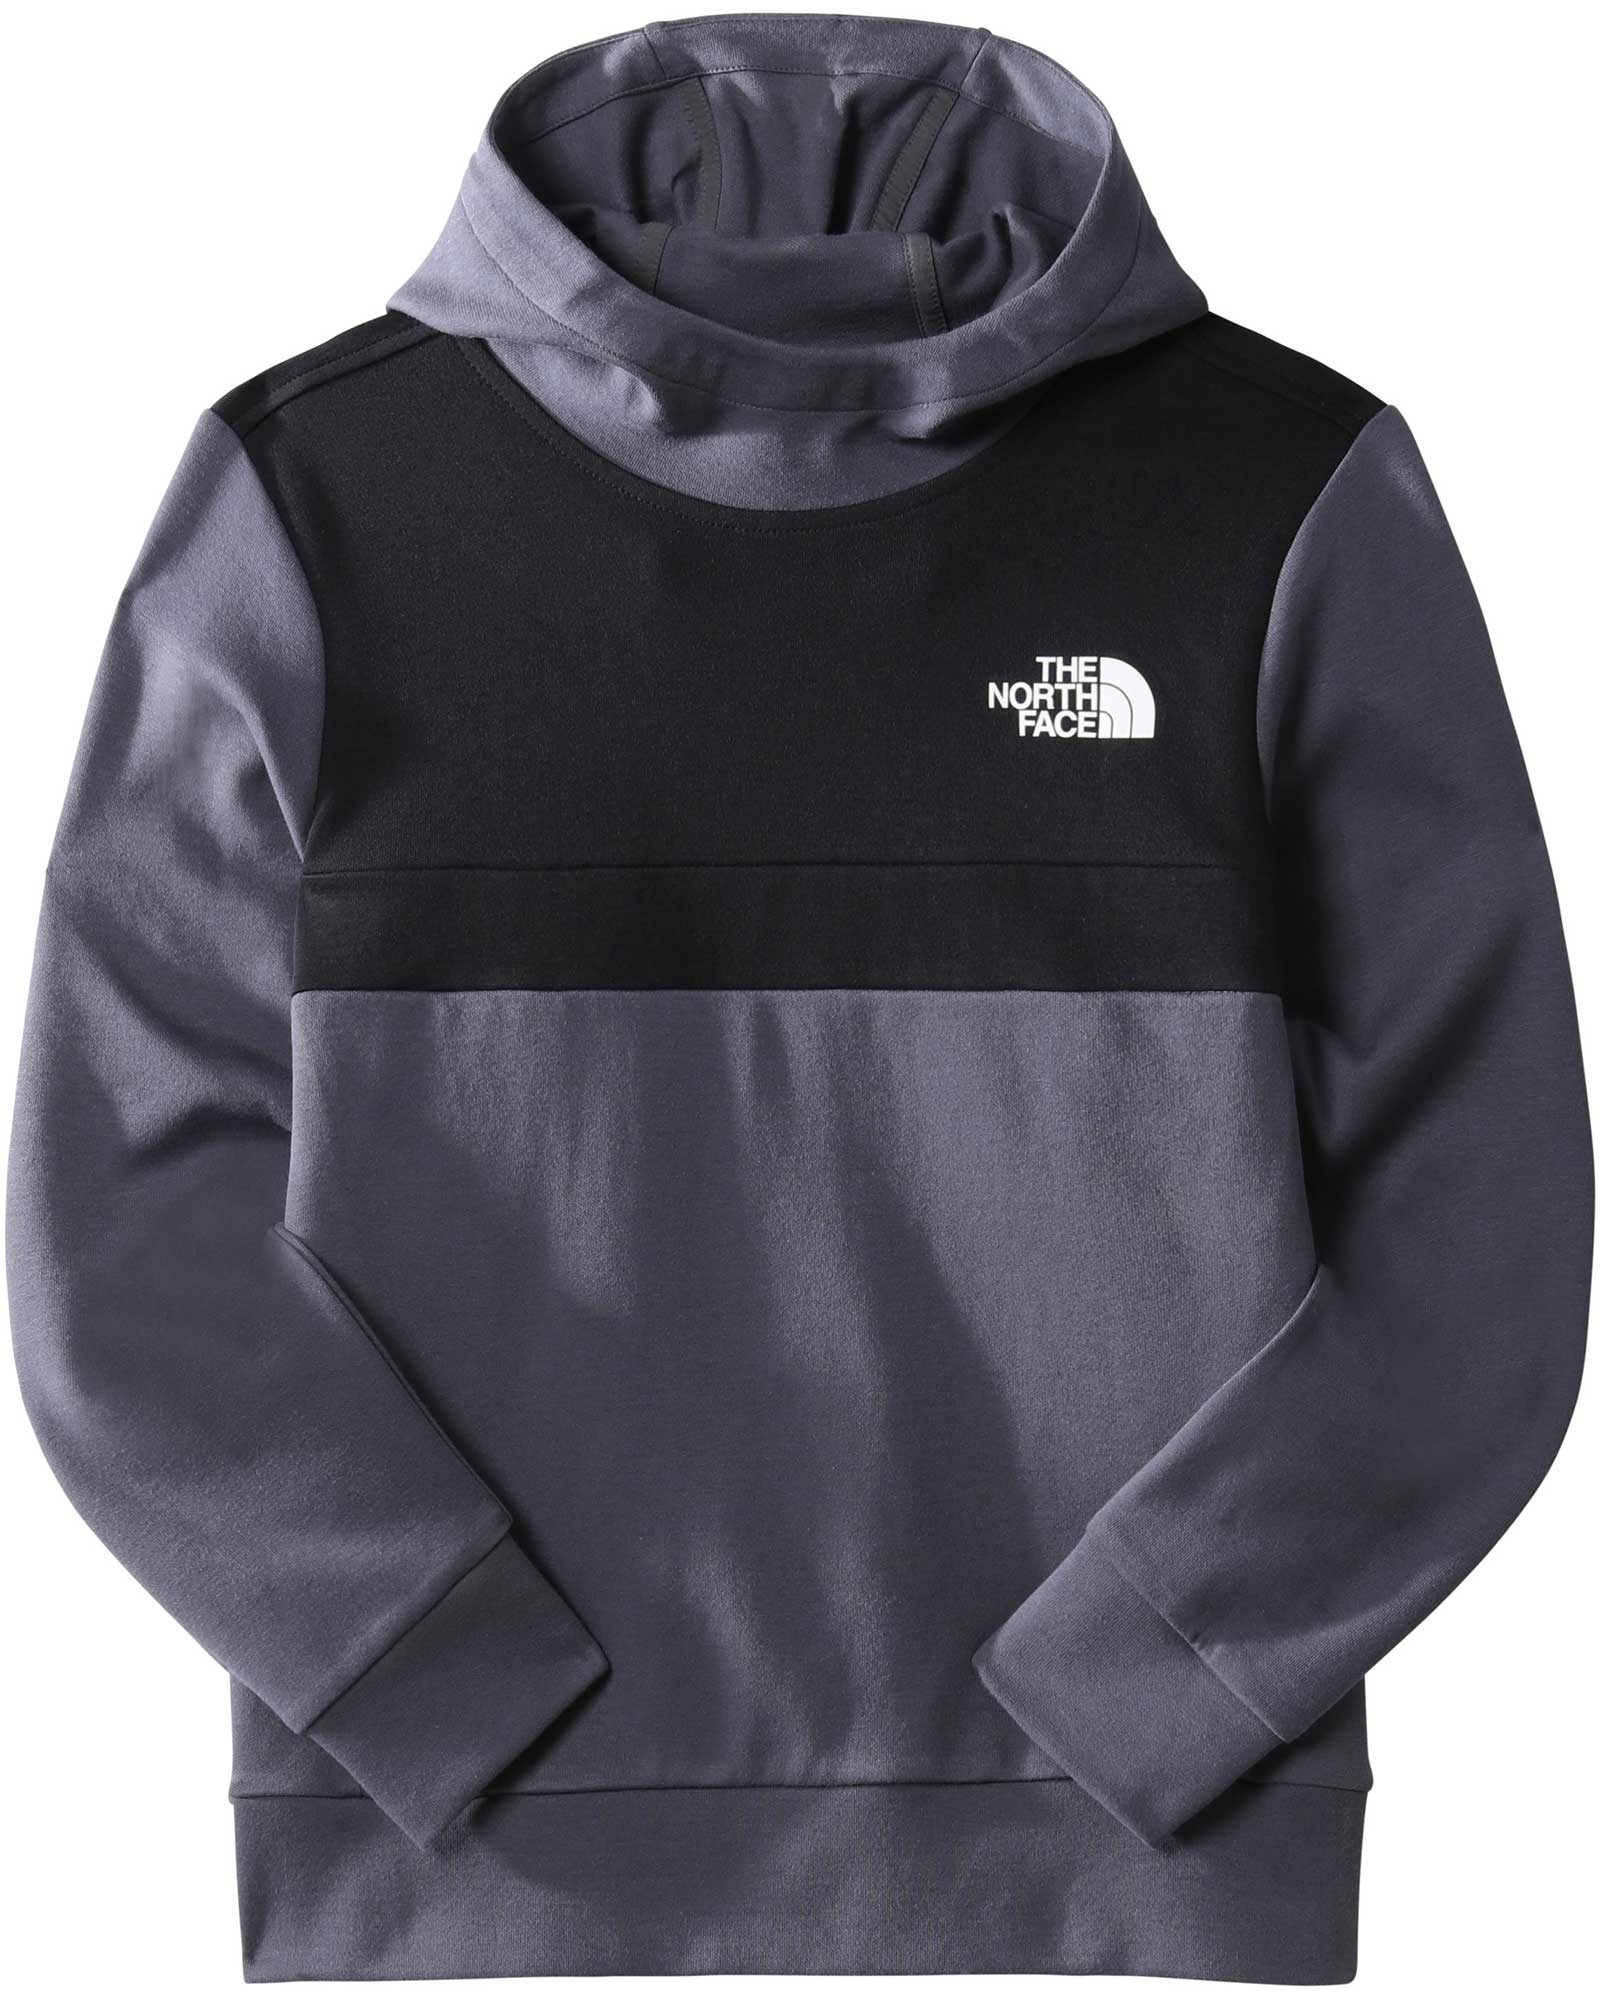 Product image of The North Face Slacker Kids' Pullover Hoodie